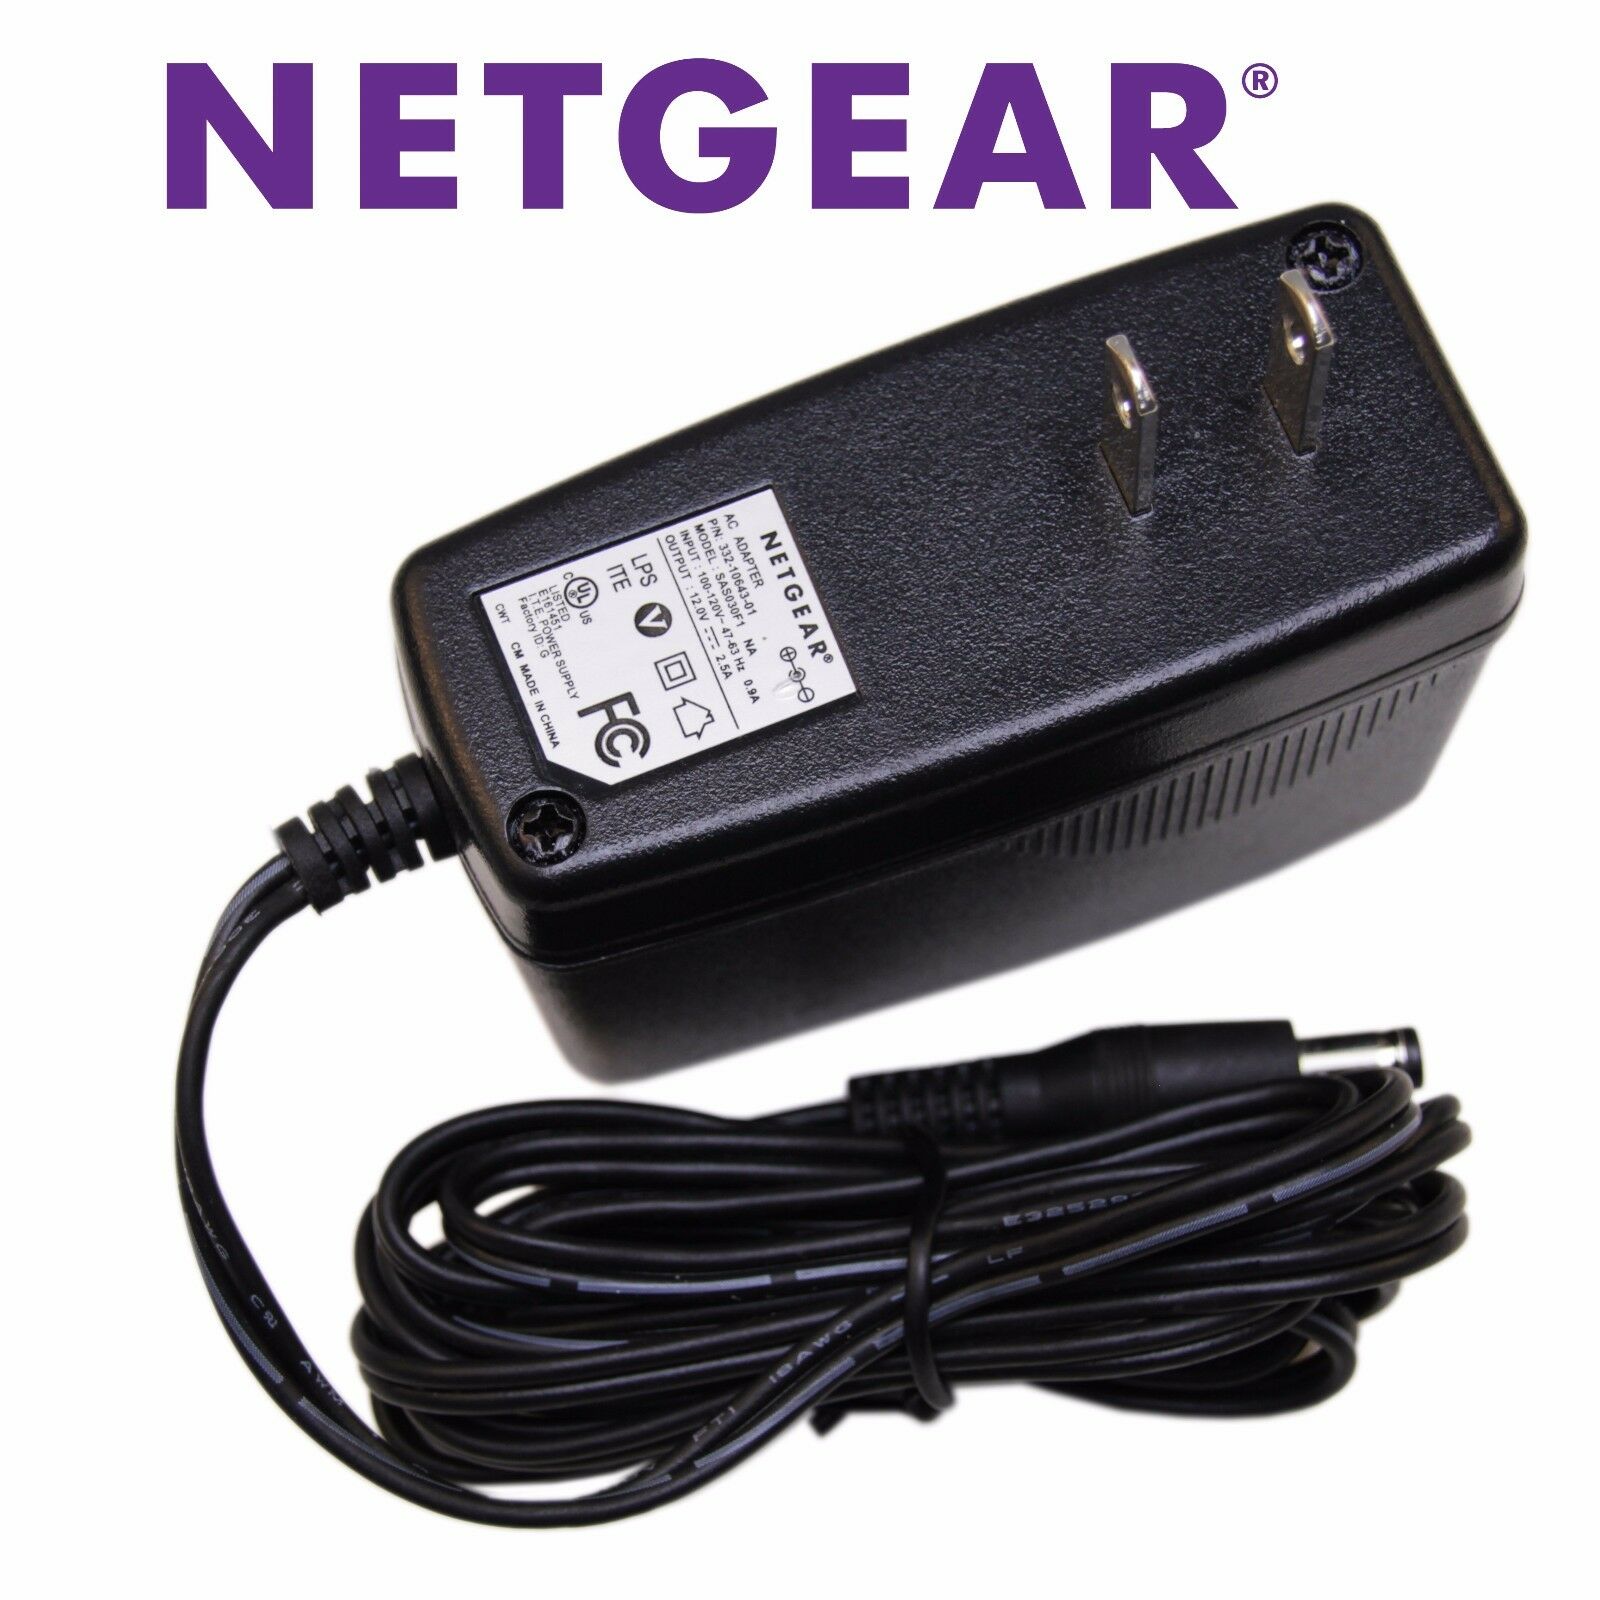 Genuine Netgear 12V AC Adapter Power Supply for Wireless Router Cable DSL Modem Output Voltage: 12V 2.5A P/N: 332-106 - Click Image to Close